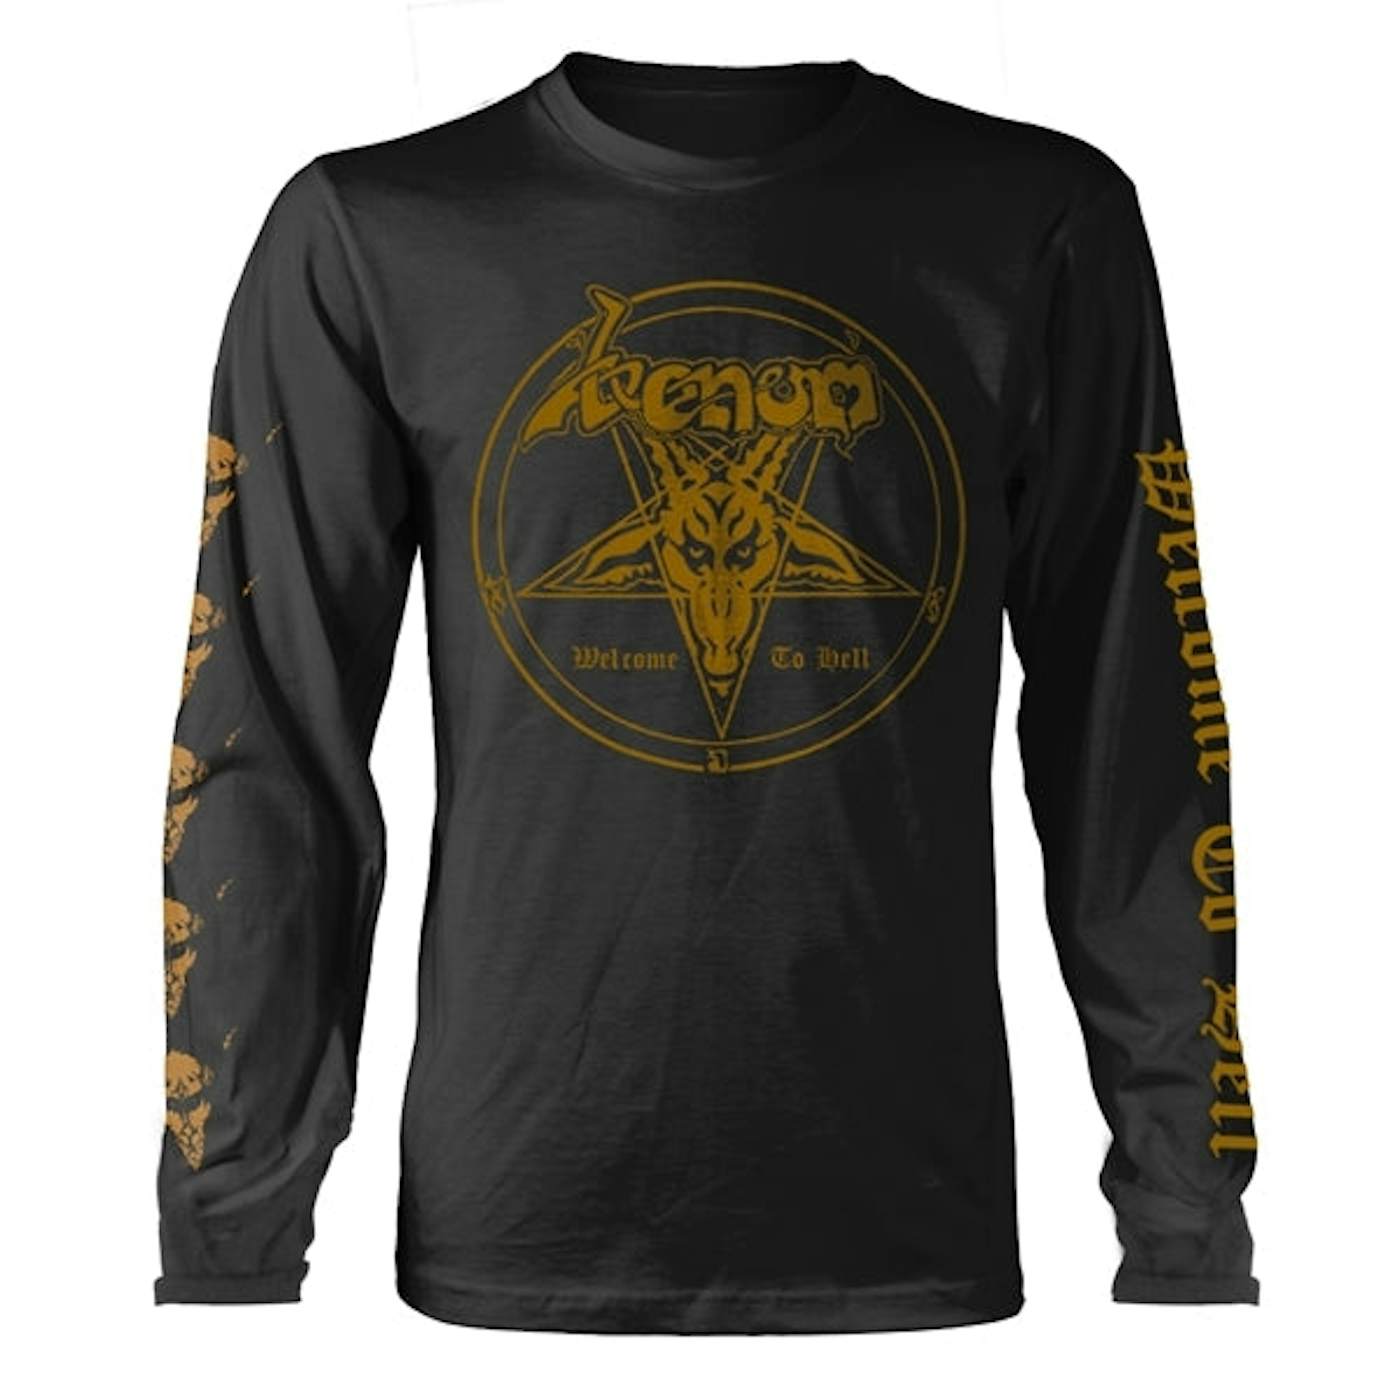  Venom Long Sleeve T Shirt - Welcome To Hell (Gold)